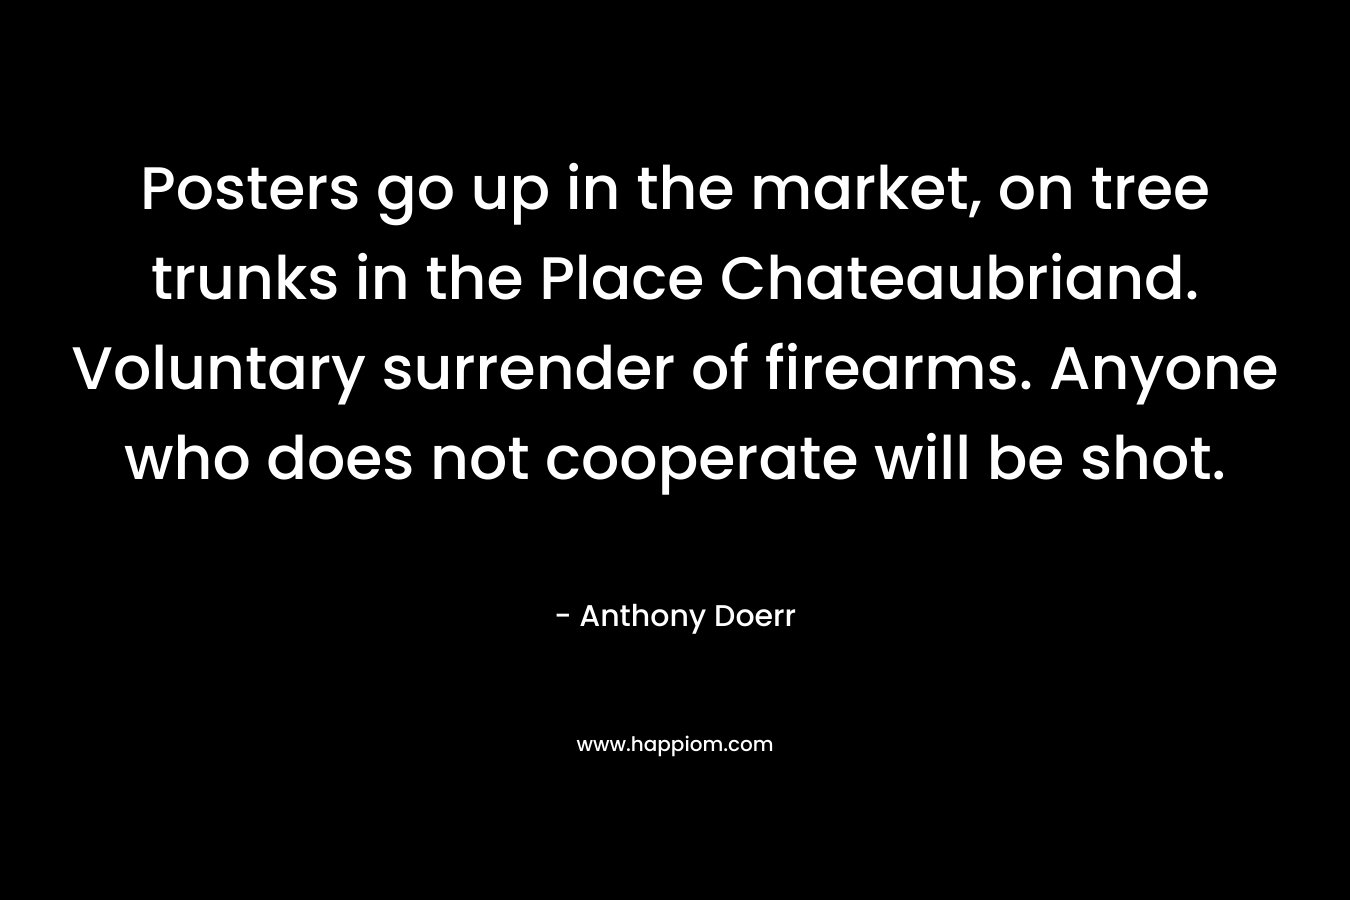 Posters go up in the market, on tree trunks in the Place Chateaubriand. Voluntary surrender of firearms. Anyone who does not cooperate will be shot. – Anthony Doerr